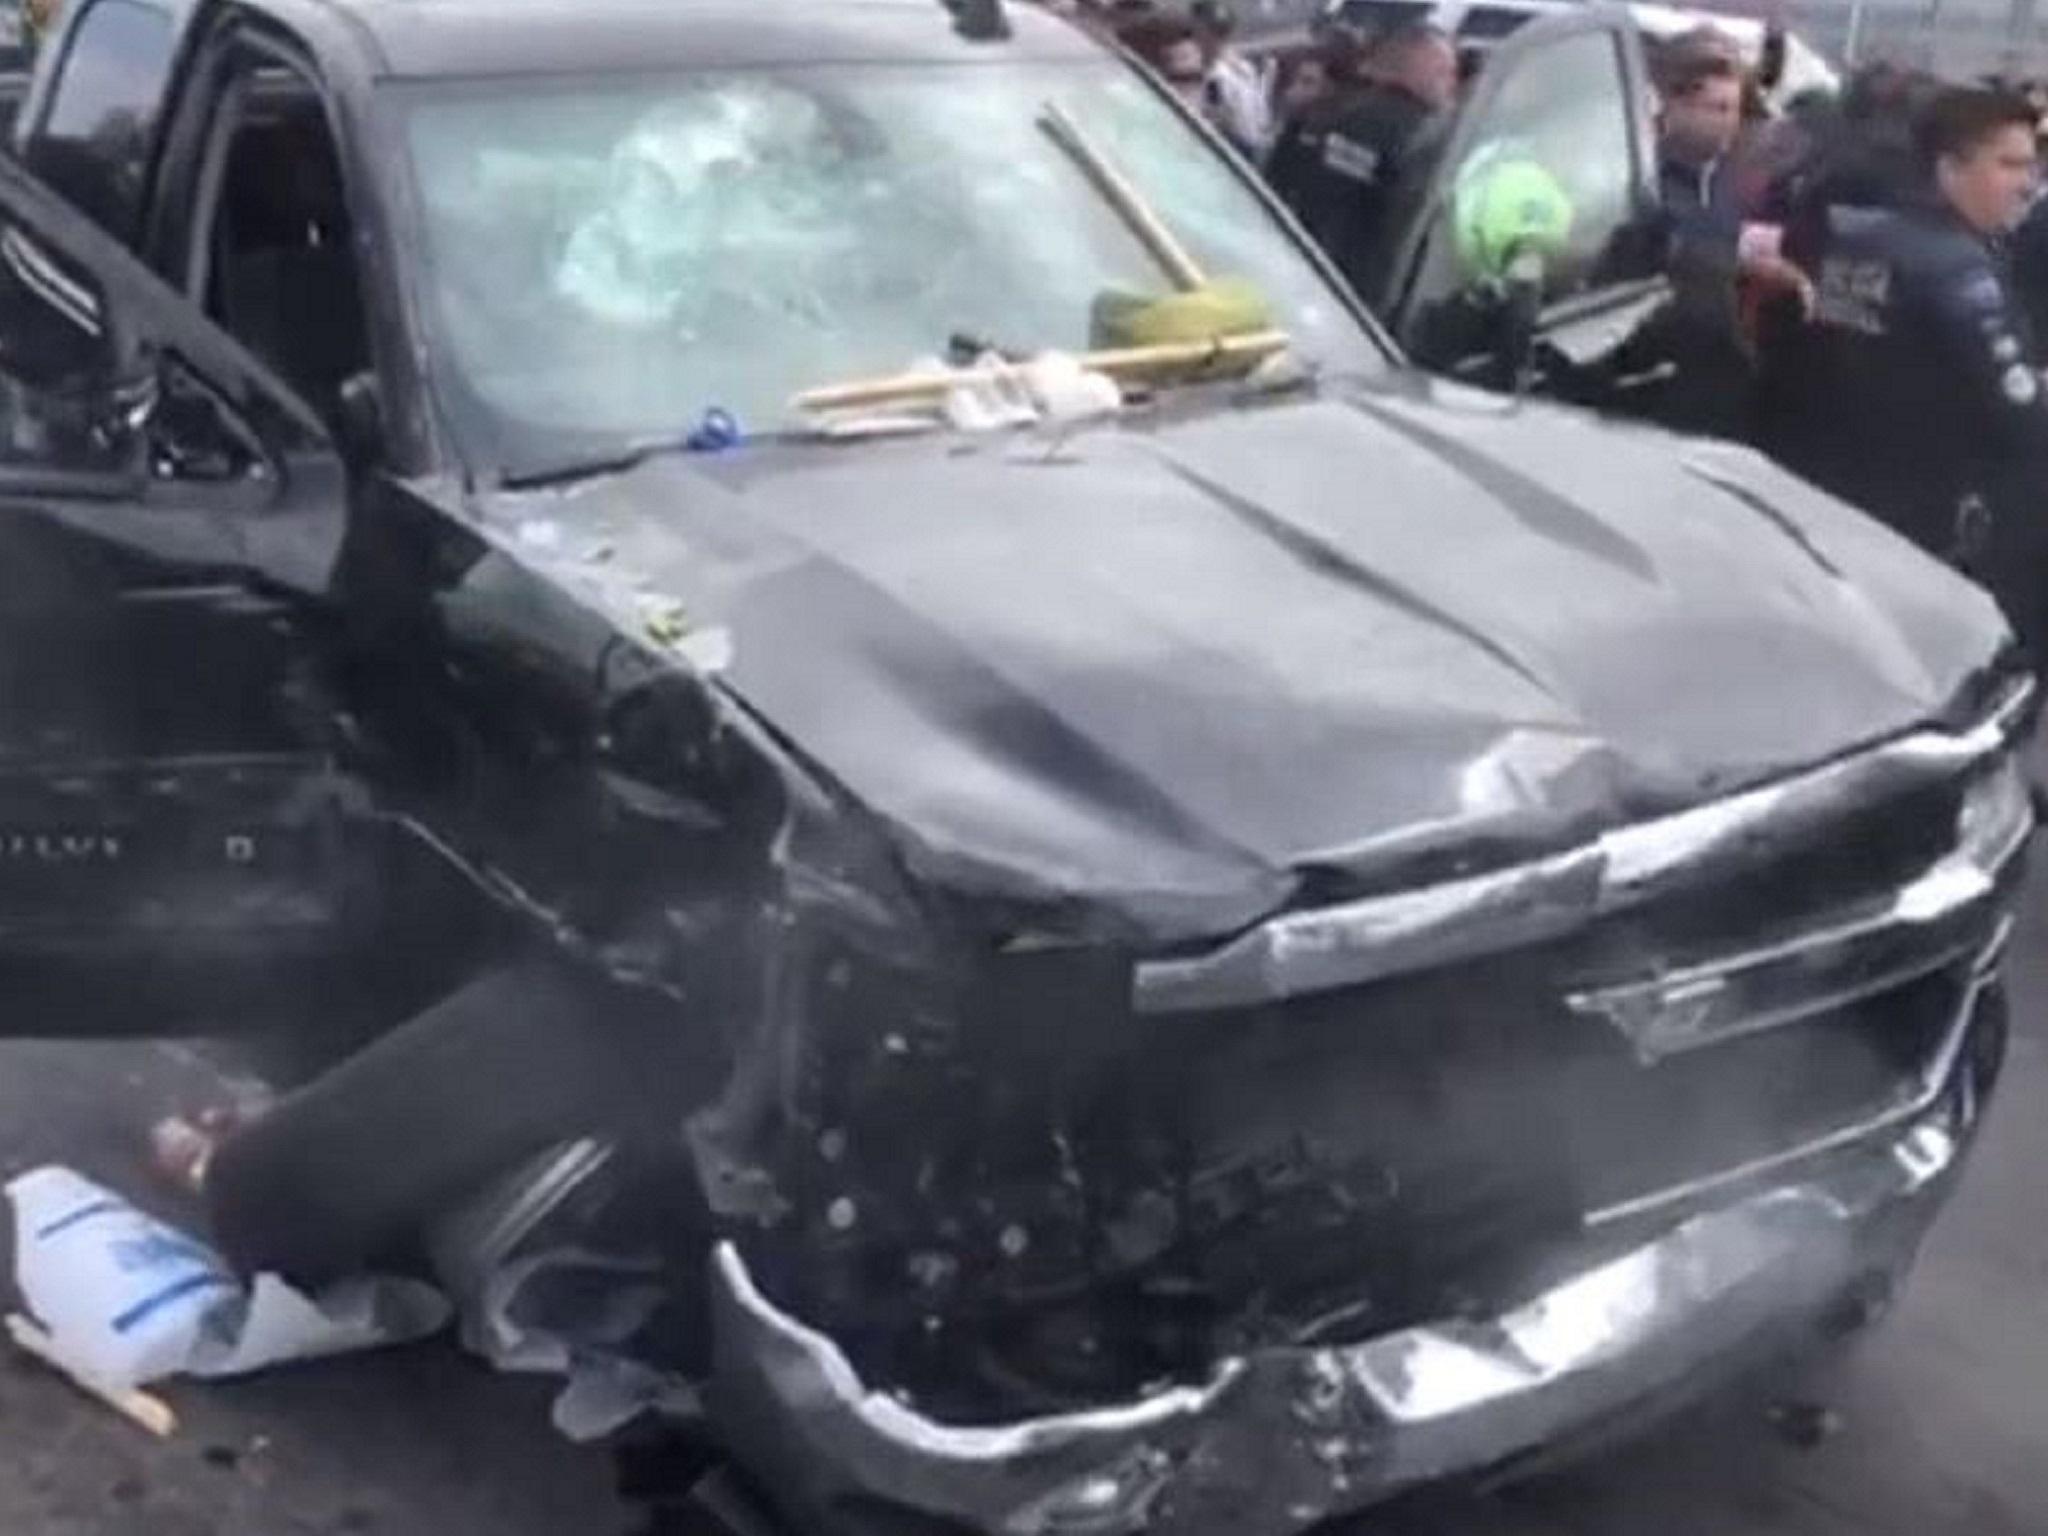 Still image from video captured at San Ysidro Port of Entry in Tijuana, Mexico, where a man allegedly drove into pedestrians and cars waiting to cross into the US.